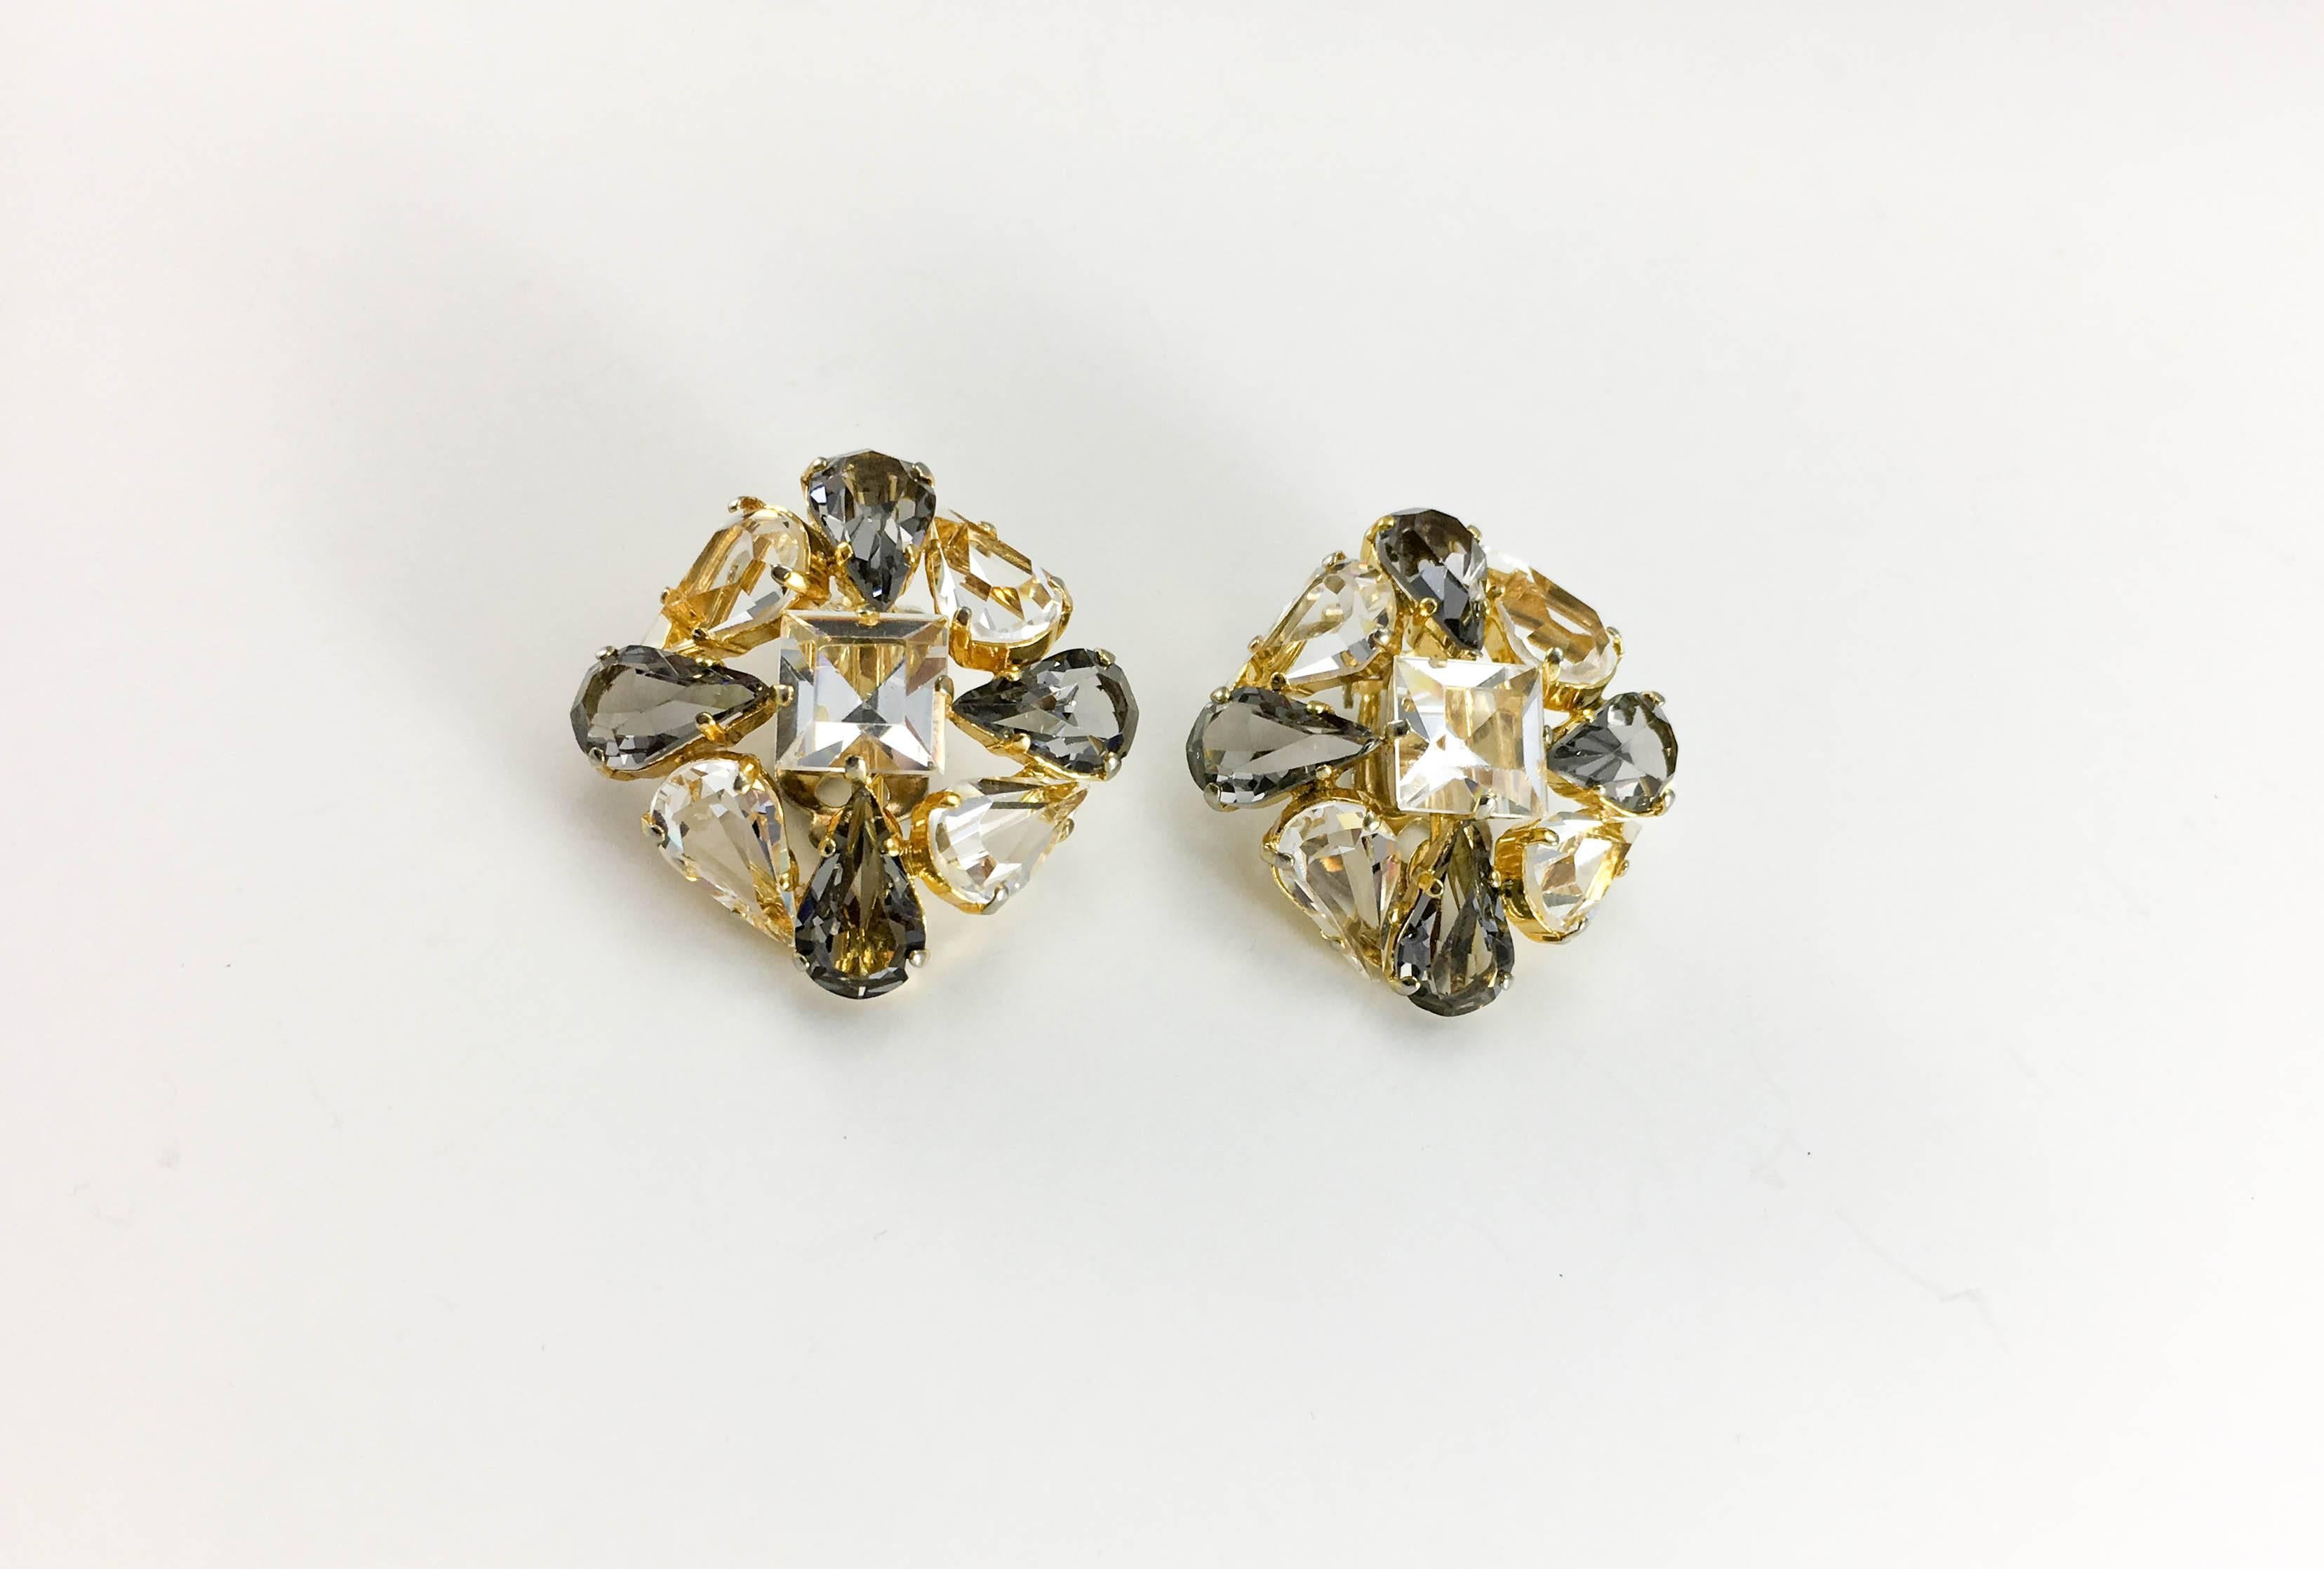 Vintage Christian Dior Crystal Clip-on Earrings. These stunning earrings by Dior date back from 1962. Made in gilt metal, the backless setting allow light through the crystals making them very sparkly. There are 2 different shapes of crystal (or